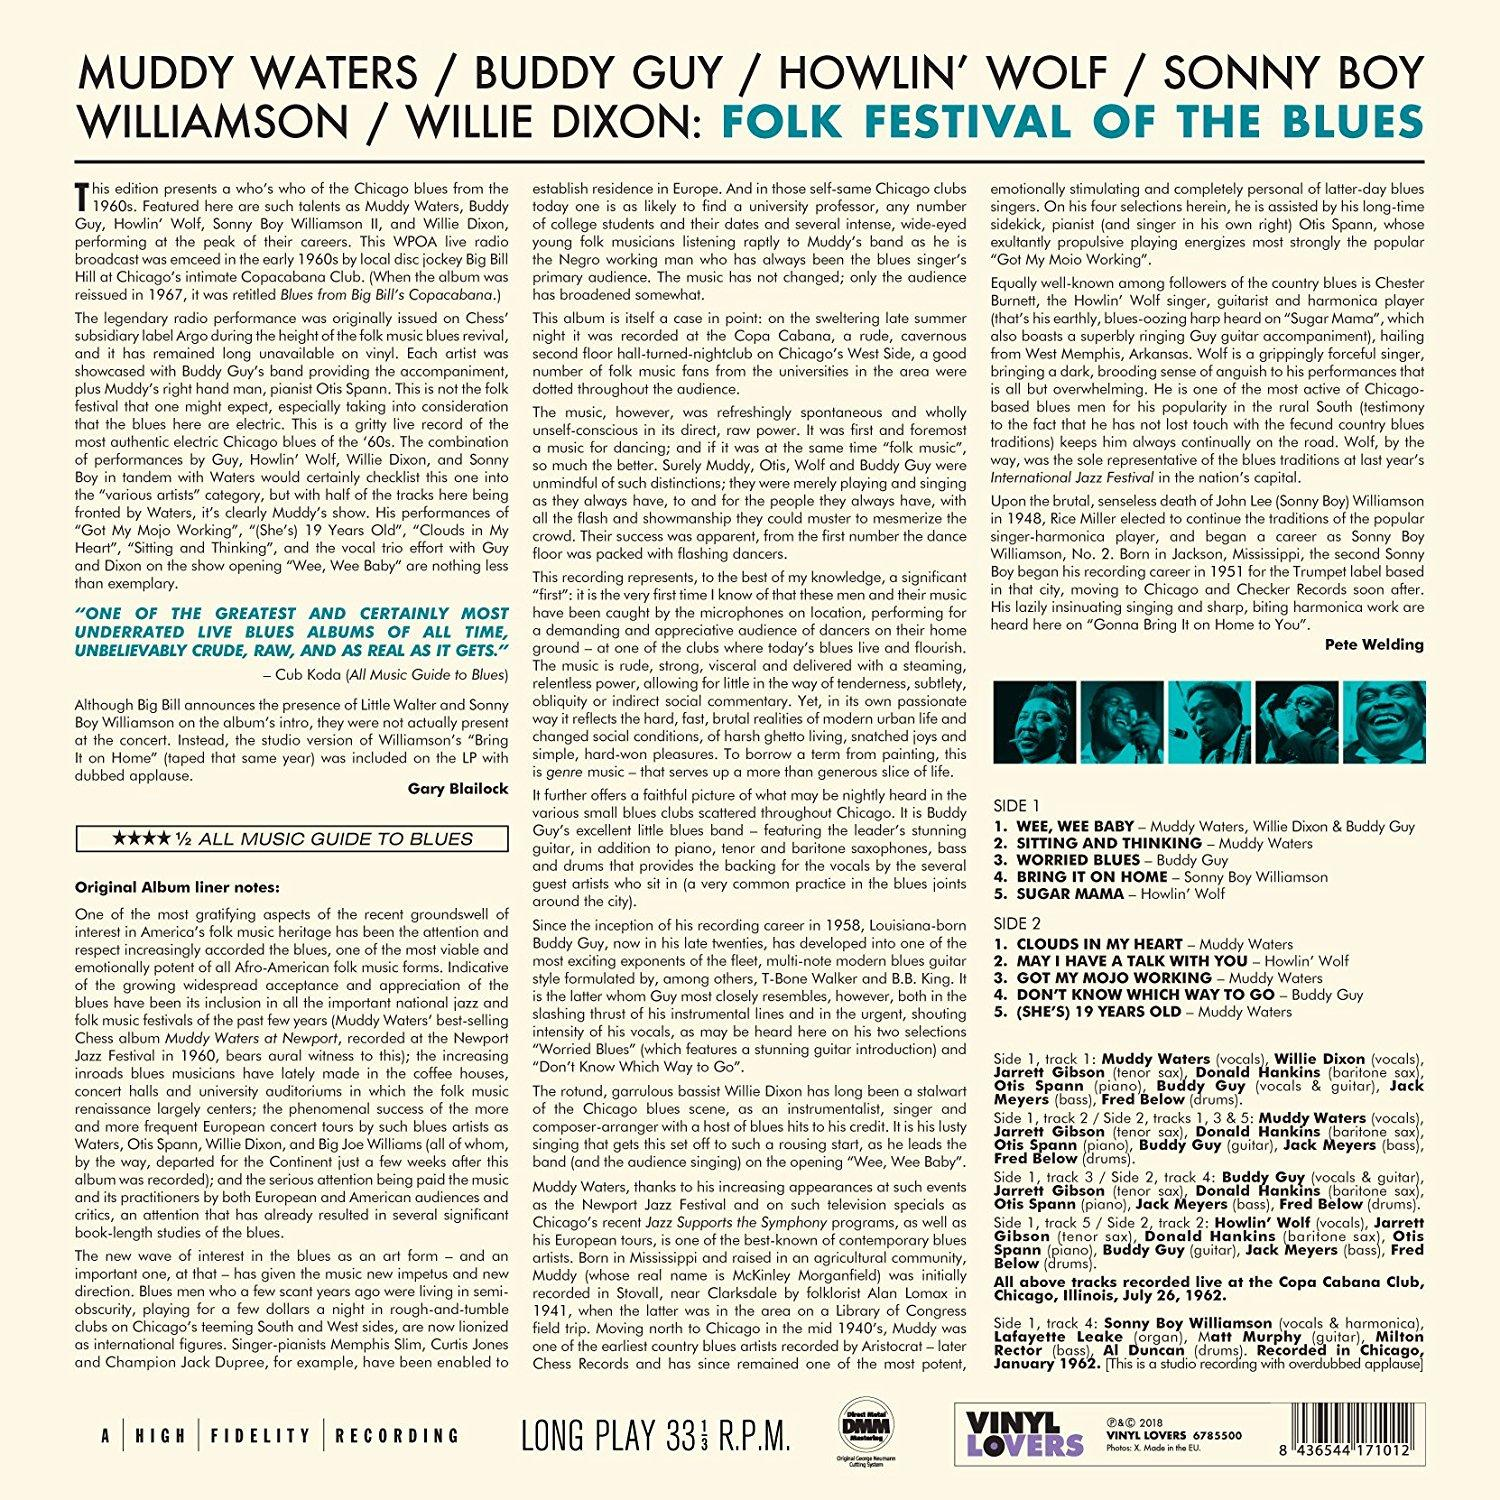 Festival Blues Muddy Guy, - Wolf Waters, With Muddy - Buddy Waters,Howl (Vinyl) Howlin\' Of Folk The